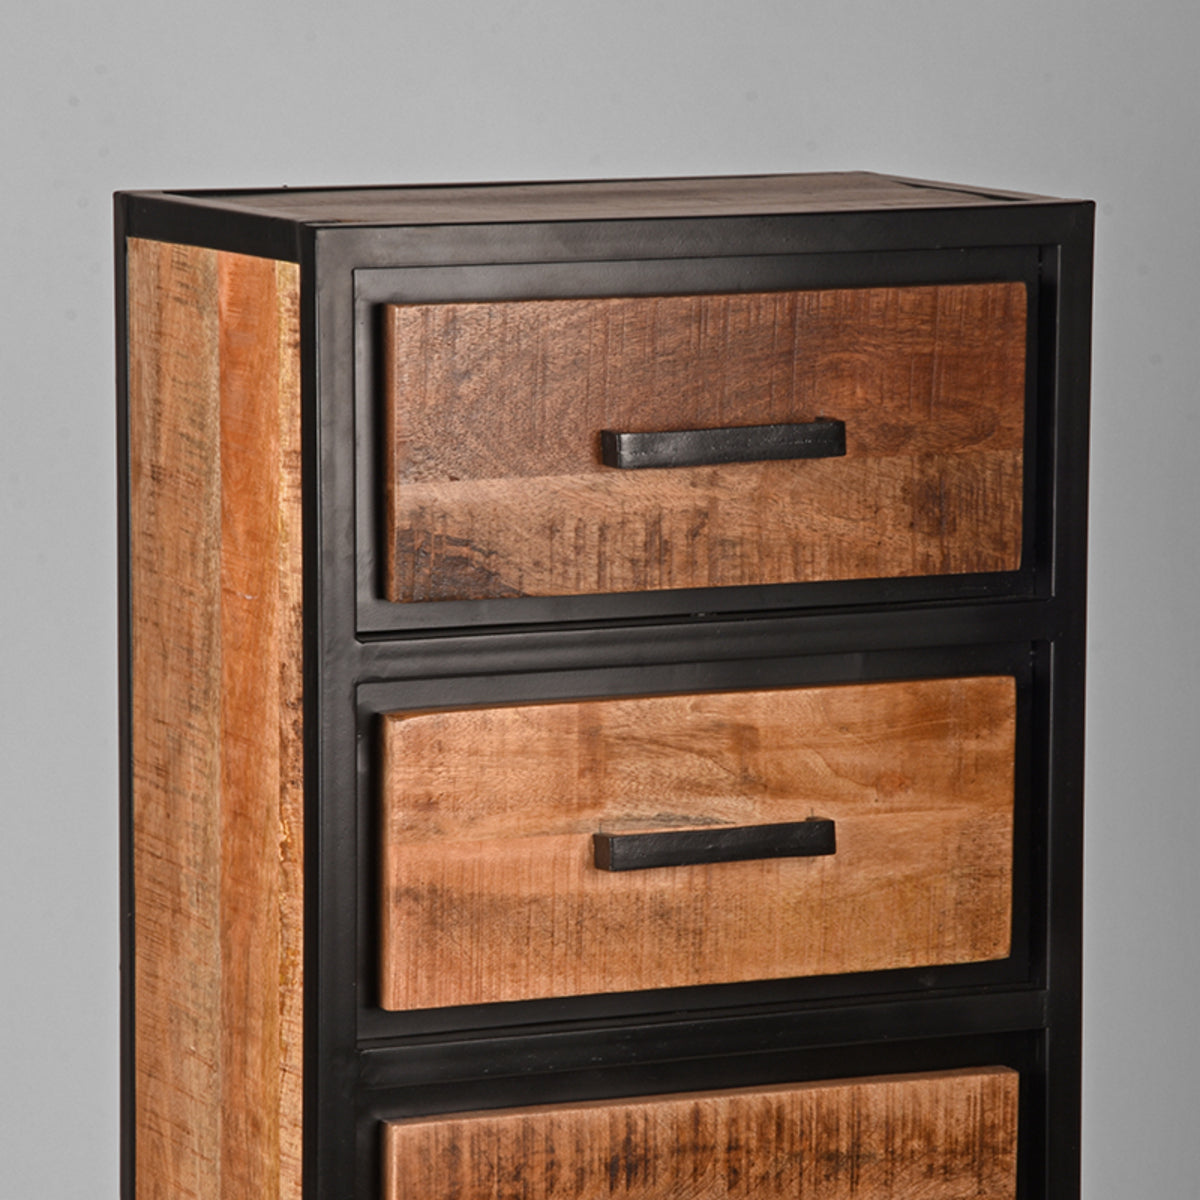 LABEL51 Chest of drawers Tampa - Rough - Mango wood